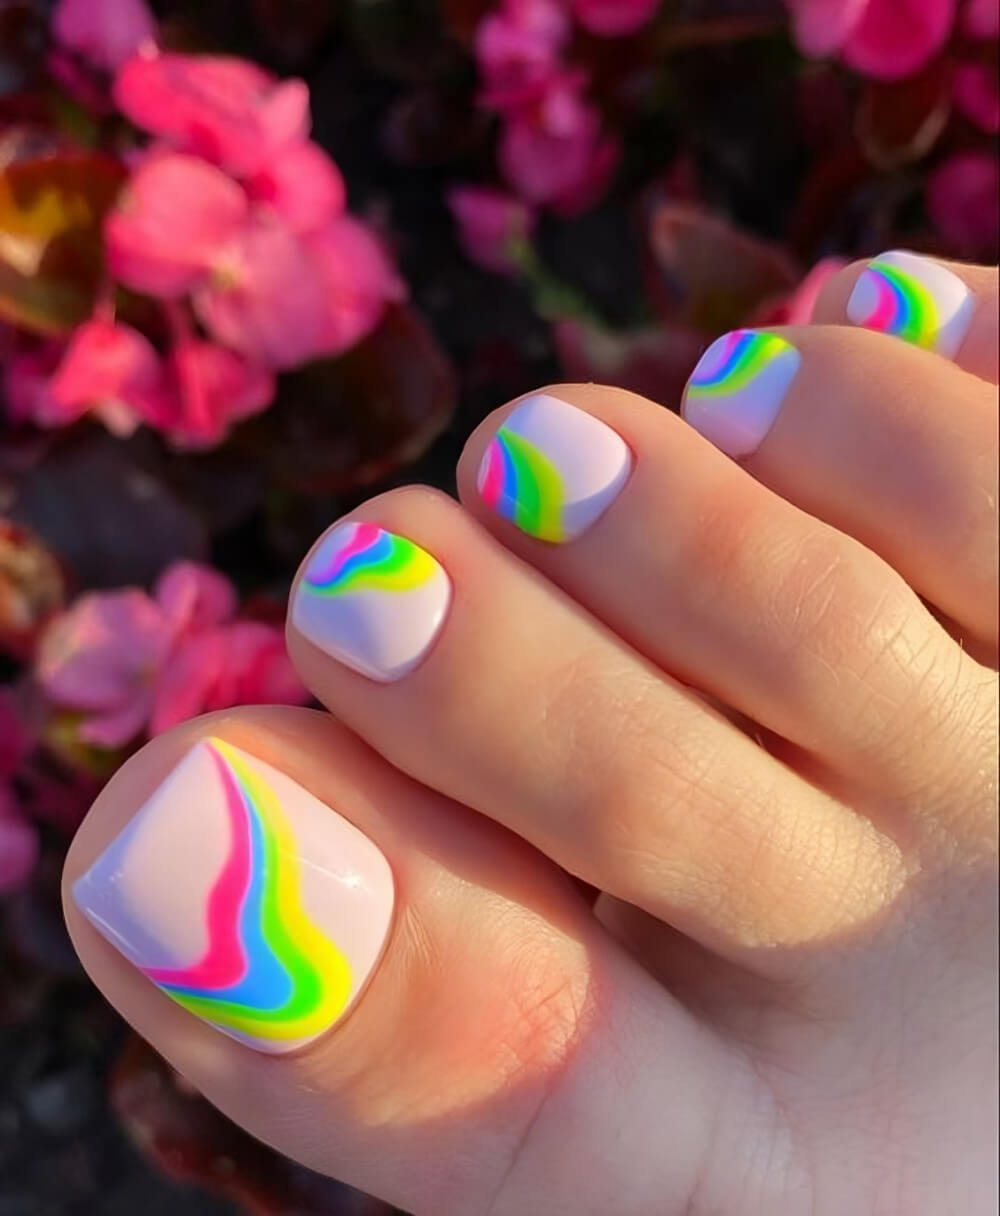 Check Out These 30 Lovely Spring Pedicure Designs - 191